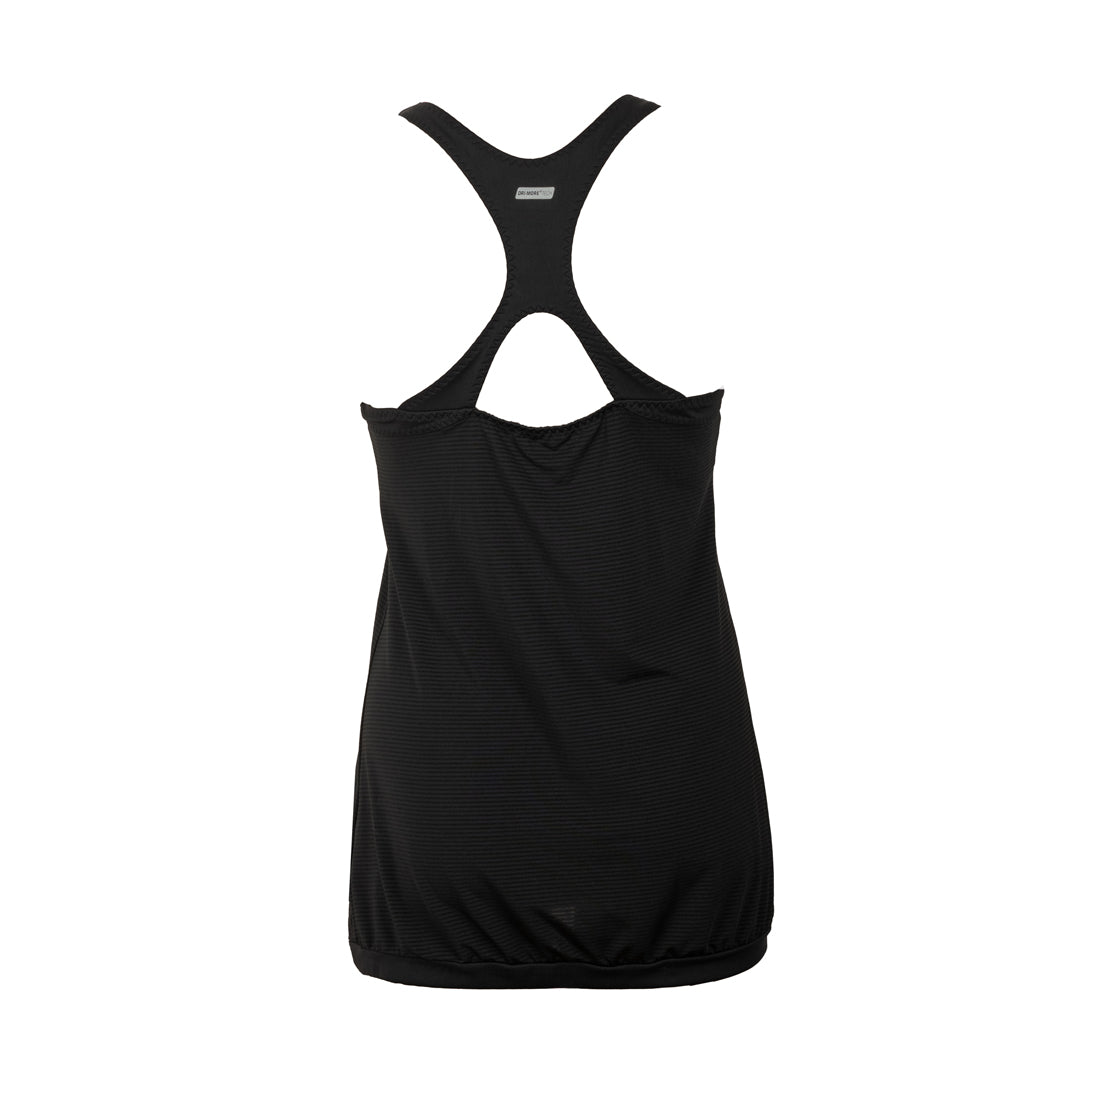 Athletic Works Shirts For Women - mymadstore.com